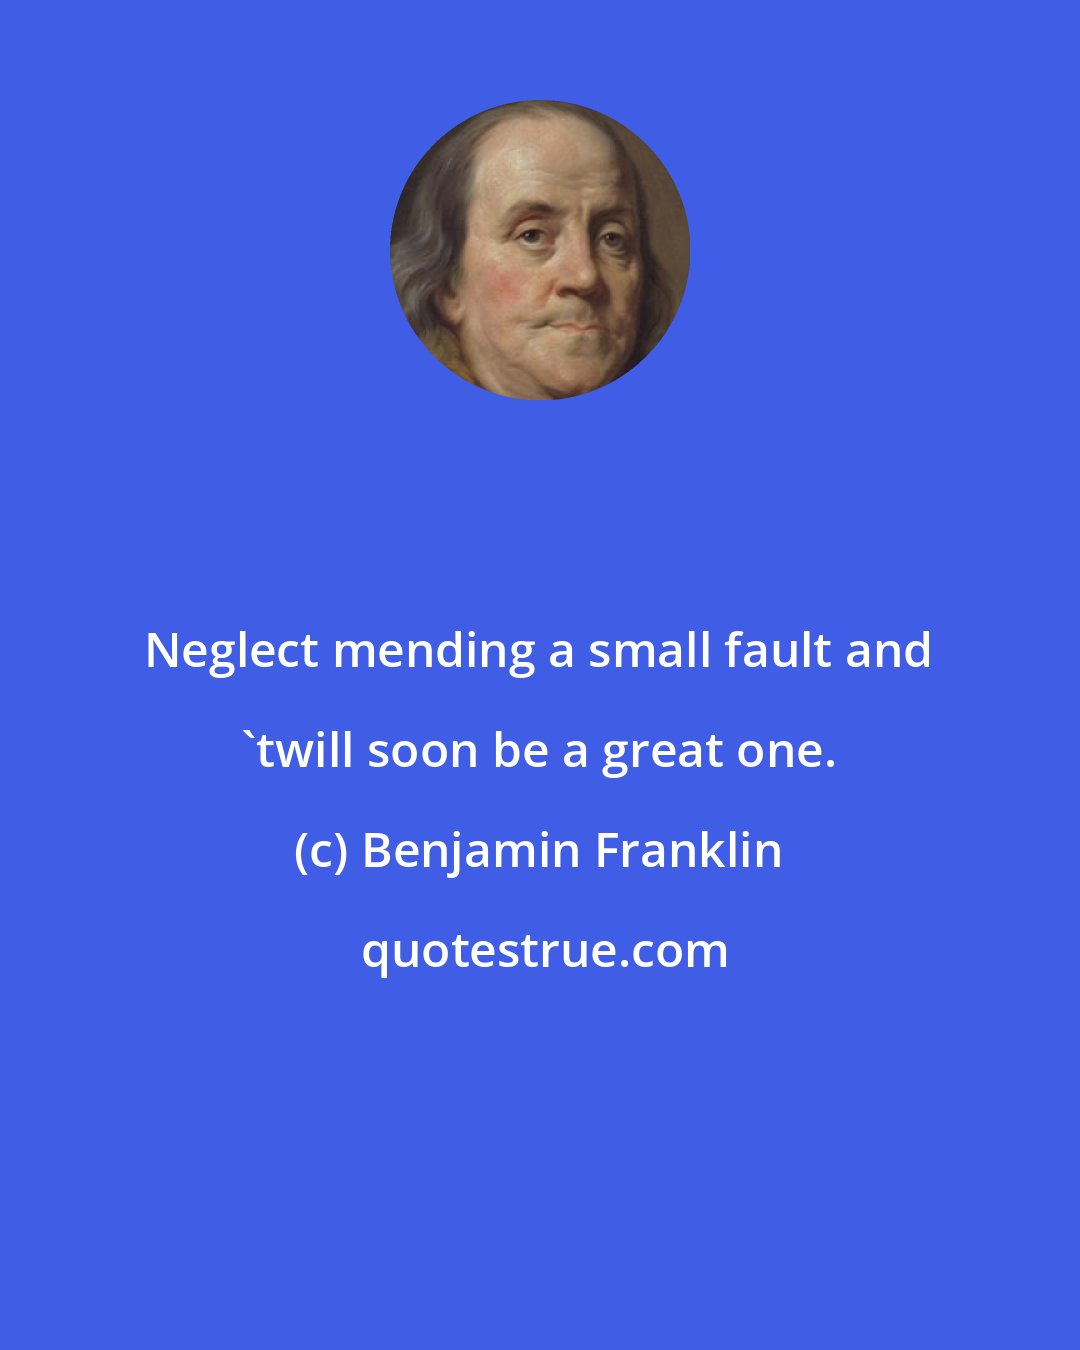 Benjamin Franklin: Neglect mending a small fault and 'twill soon be a great one.